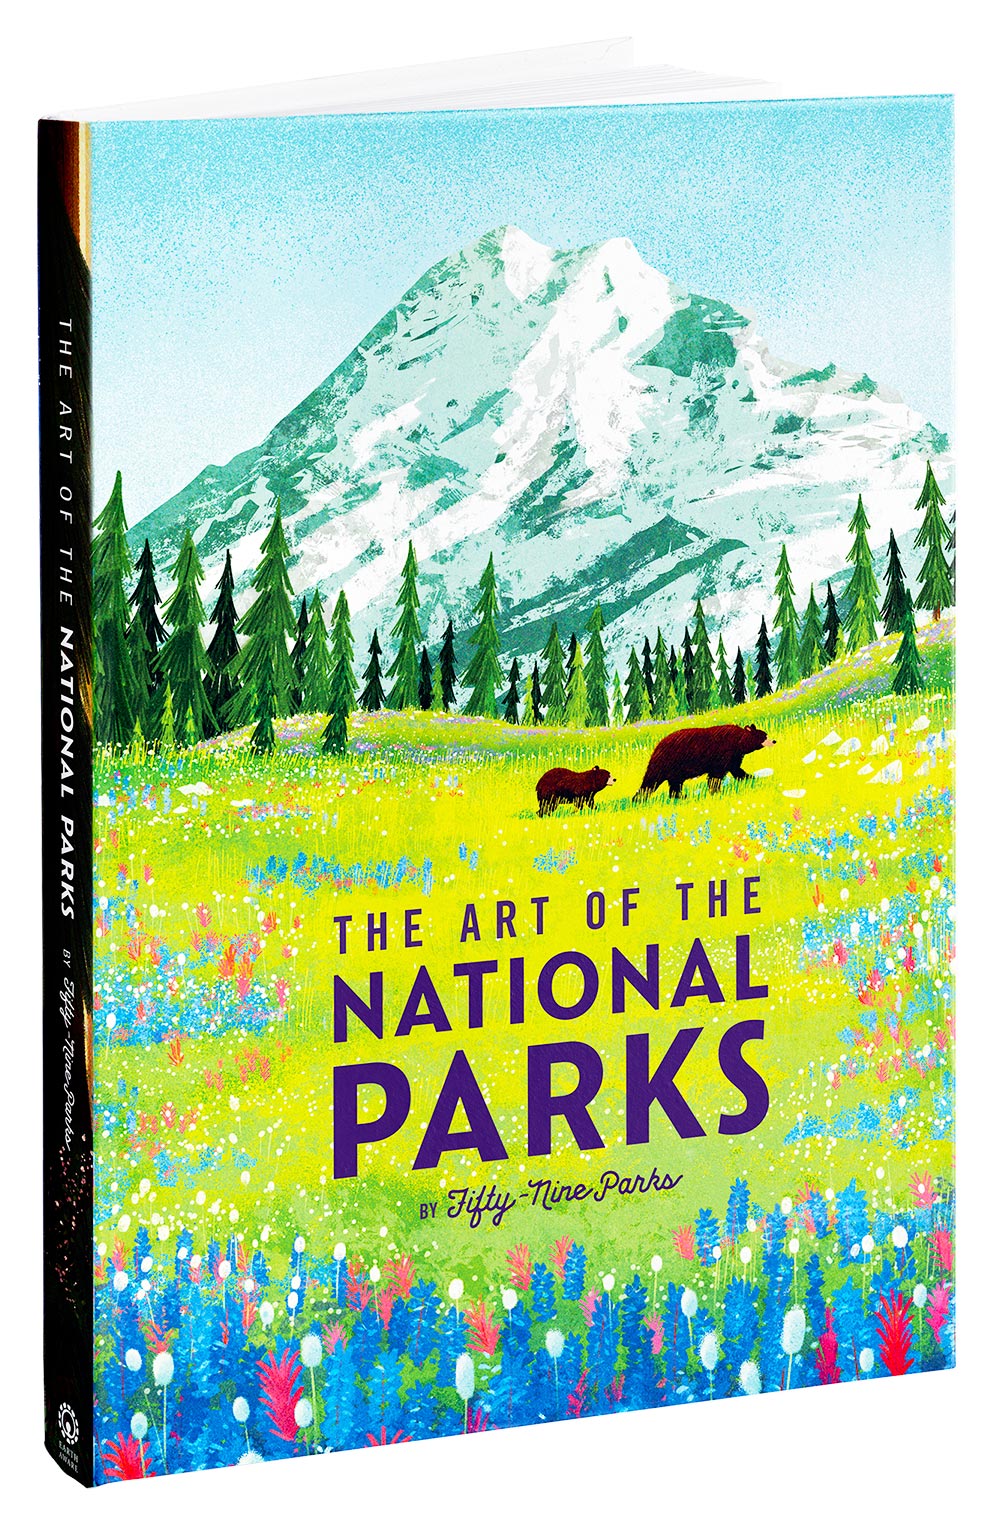 The Art of The National Parks Book by Fifty-Nine Parks and Insight Editions Image